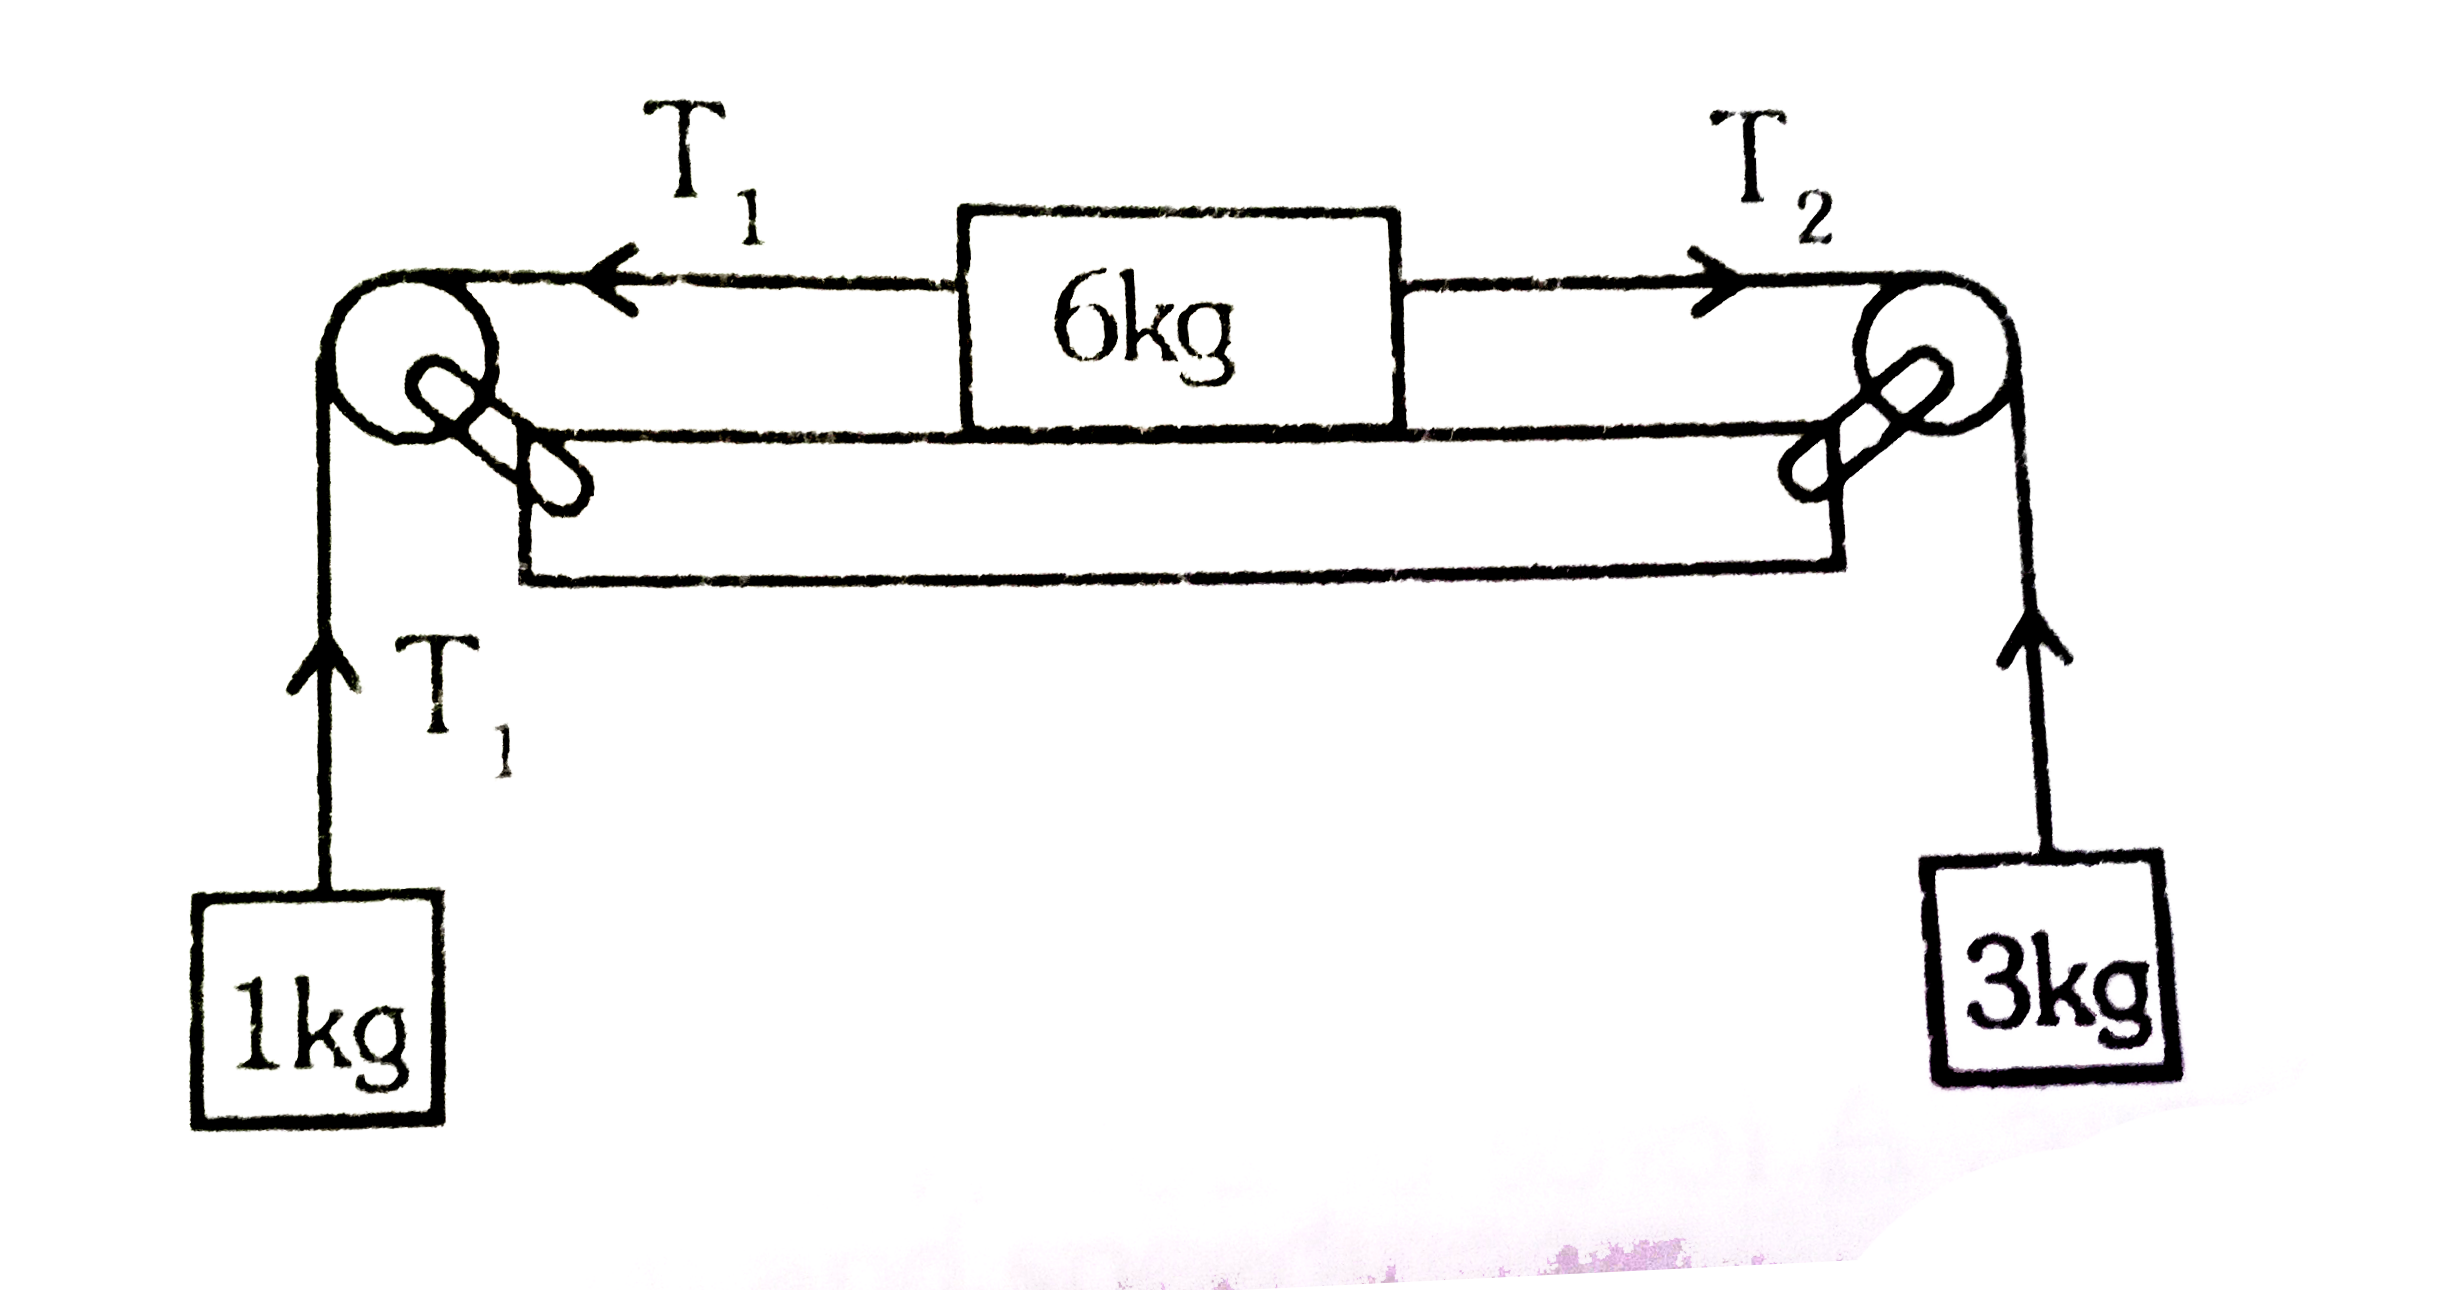 Three masses of 1 kg, 6 kg and 3 kg are connected to each other with threads and are placed on a table as shown in figure. What is the accelration with which the system is moving? Take g=10ms^(-2):